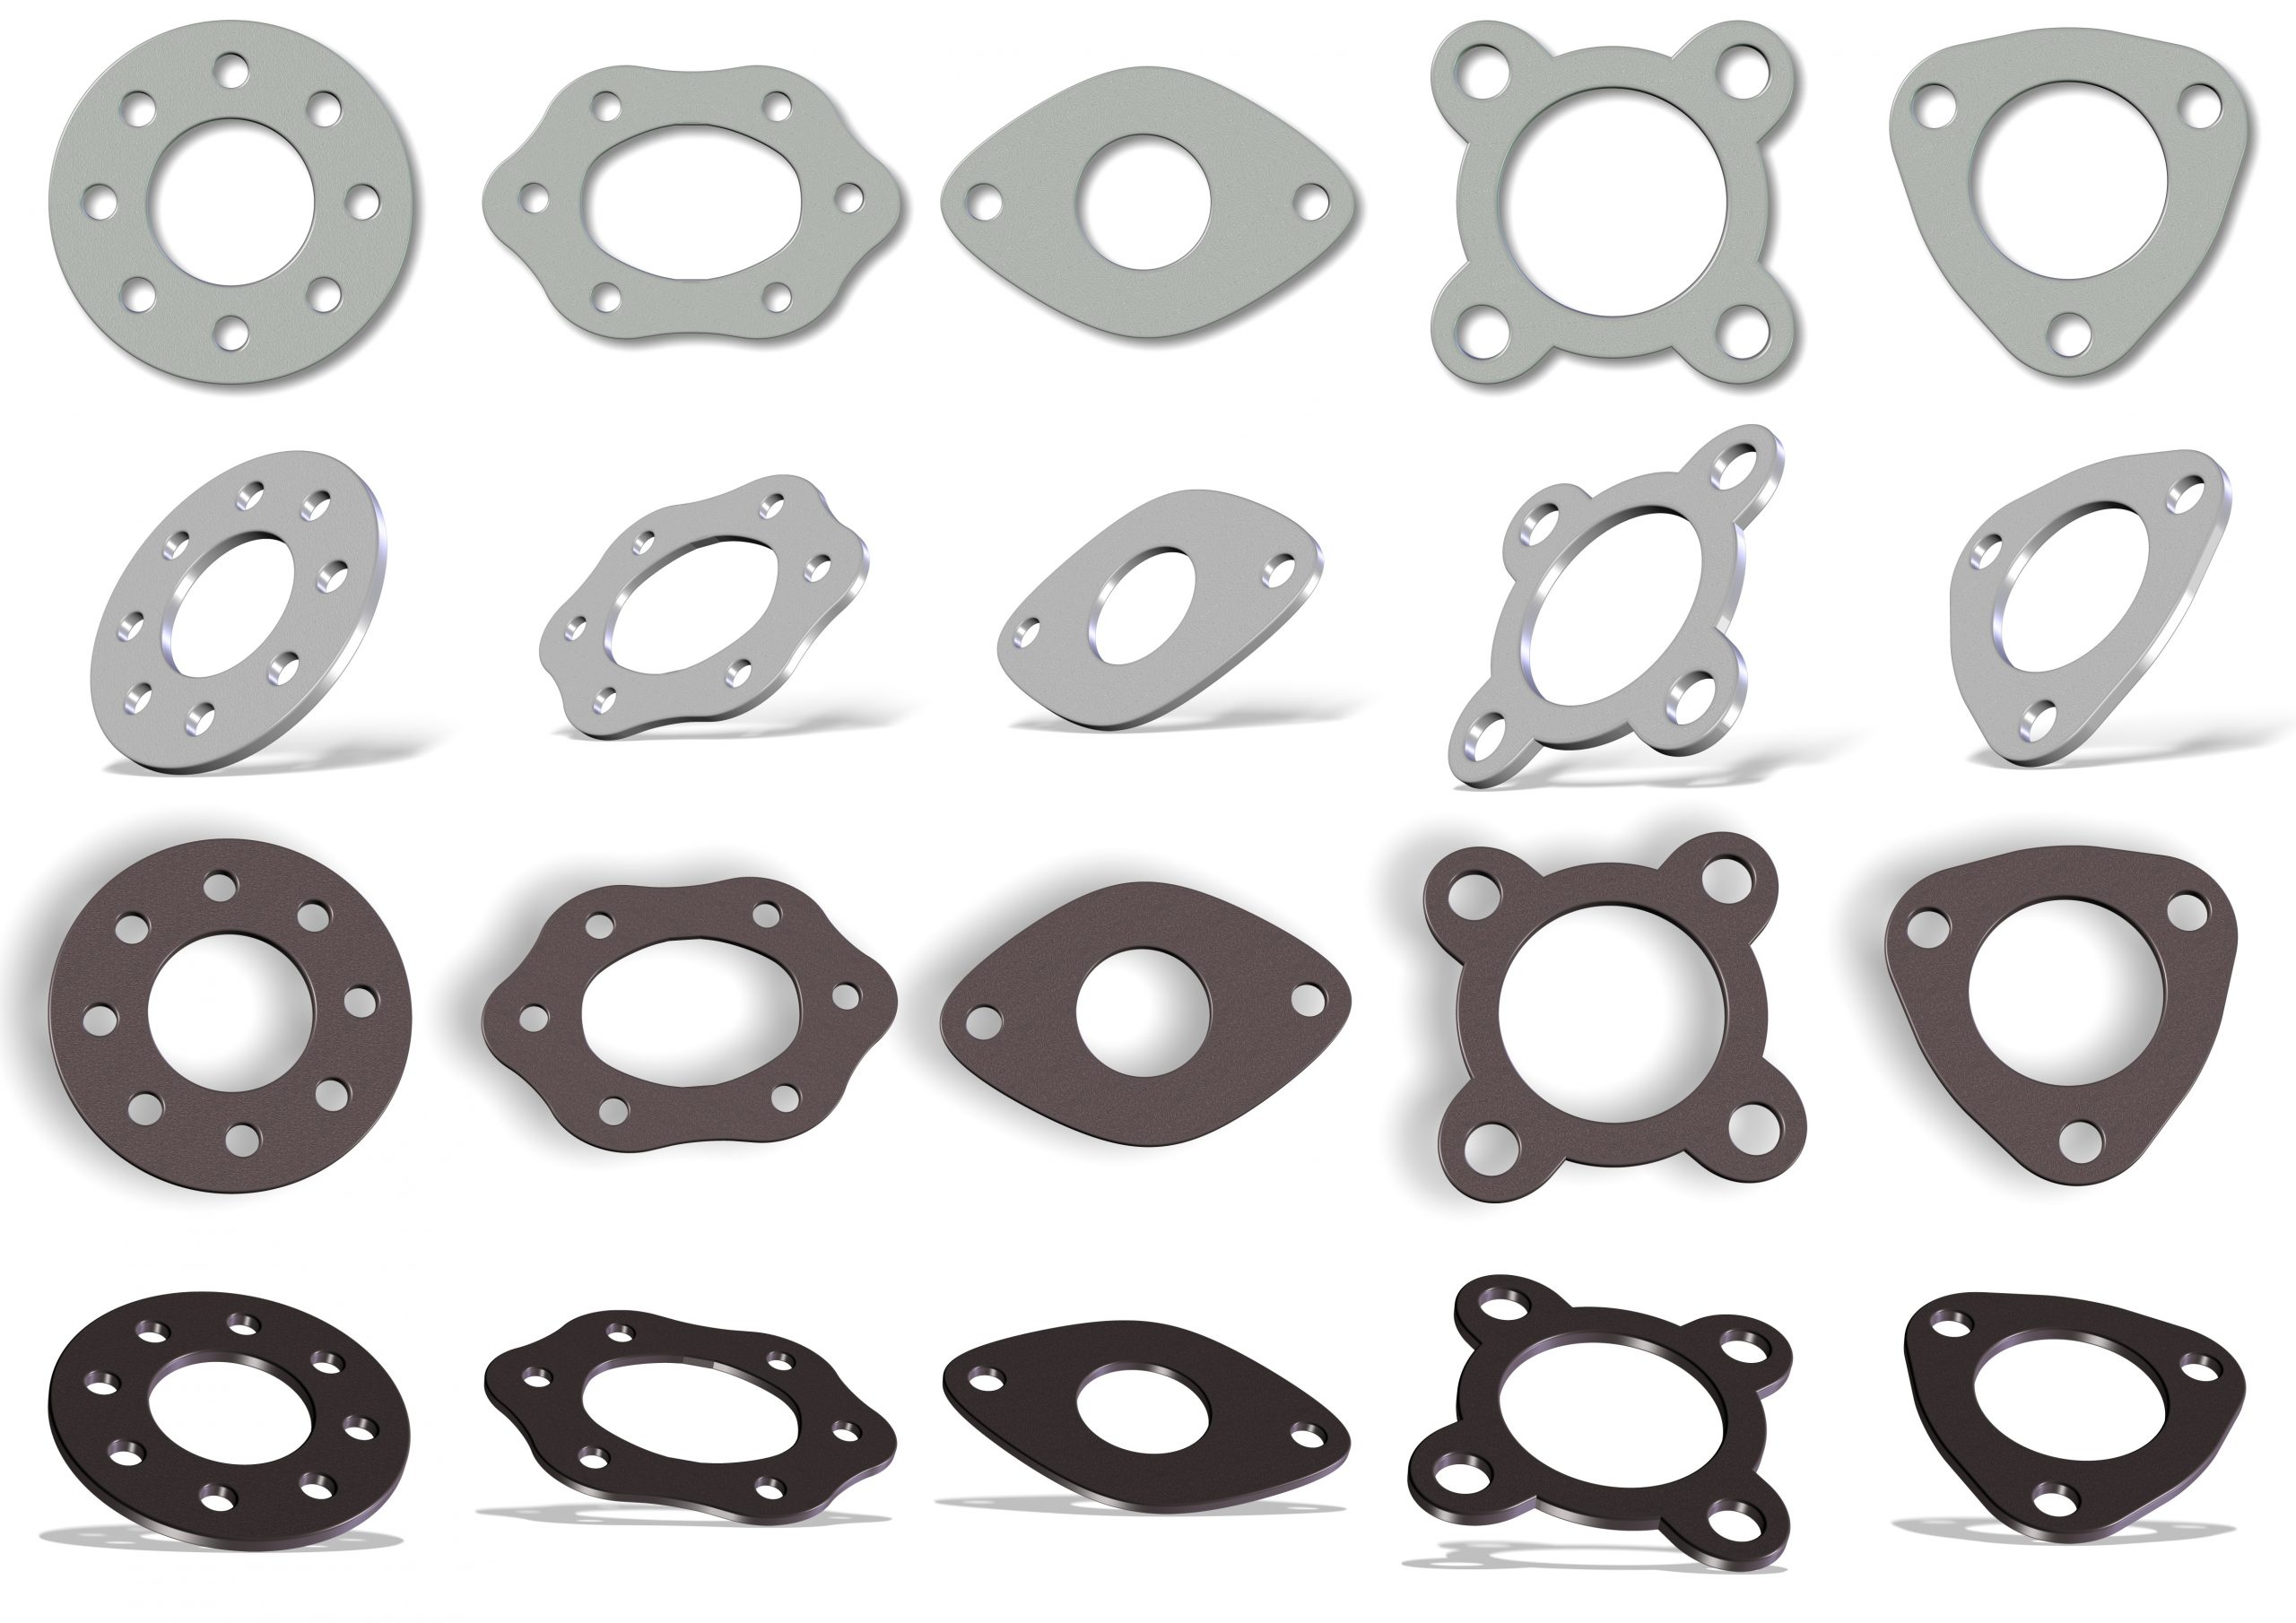 How to Design the Right Gasket